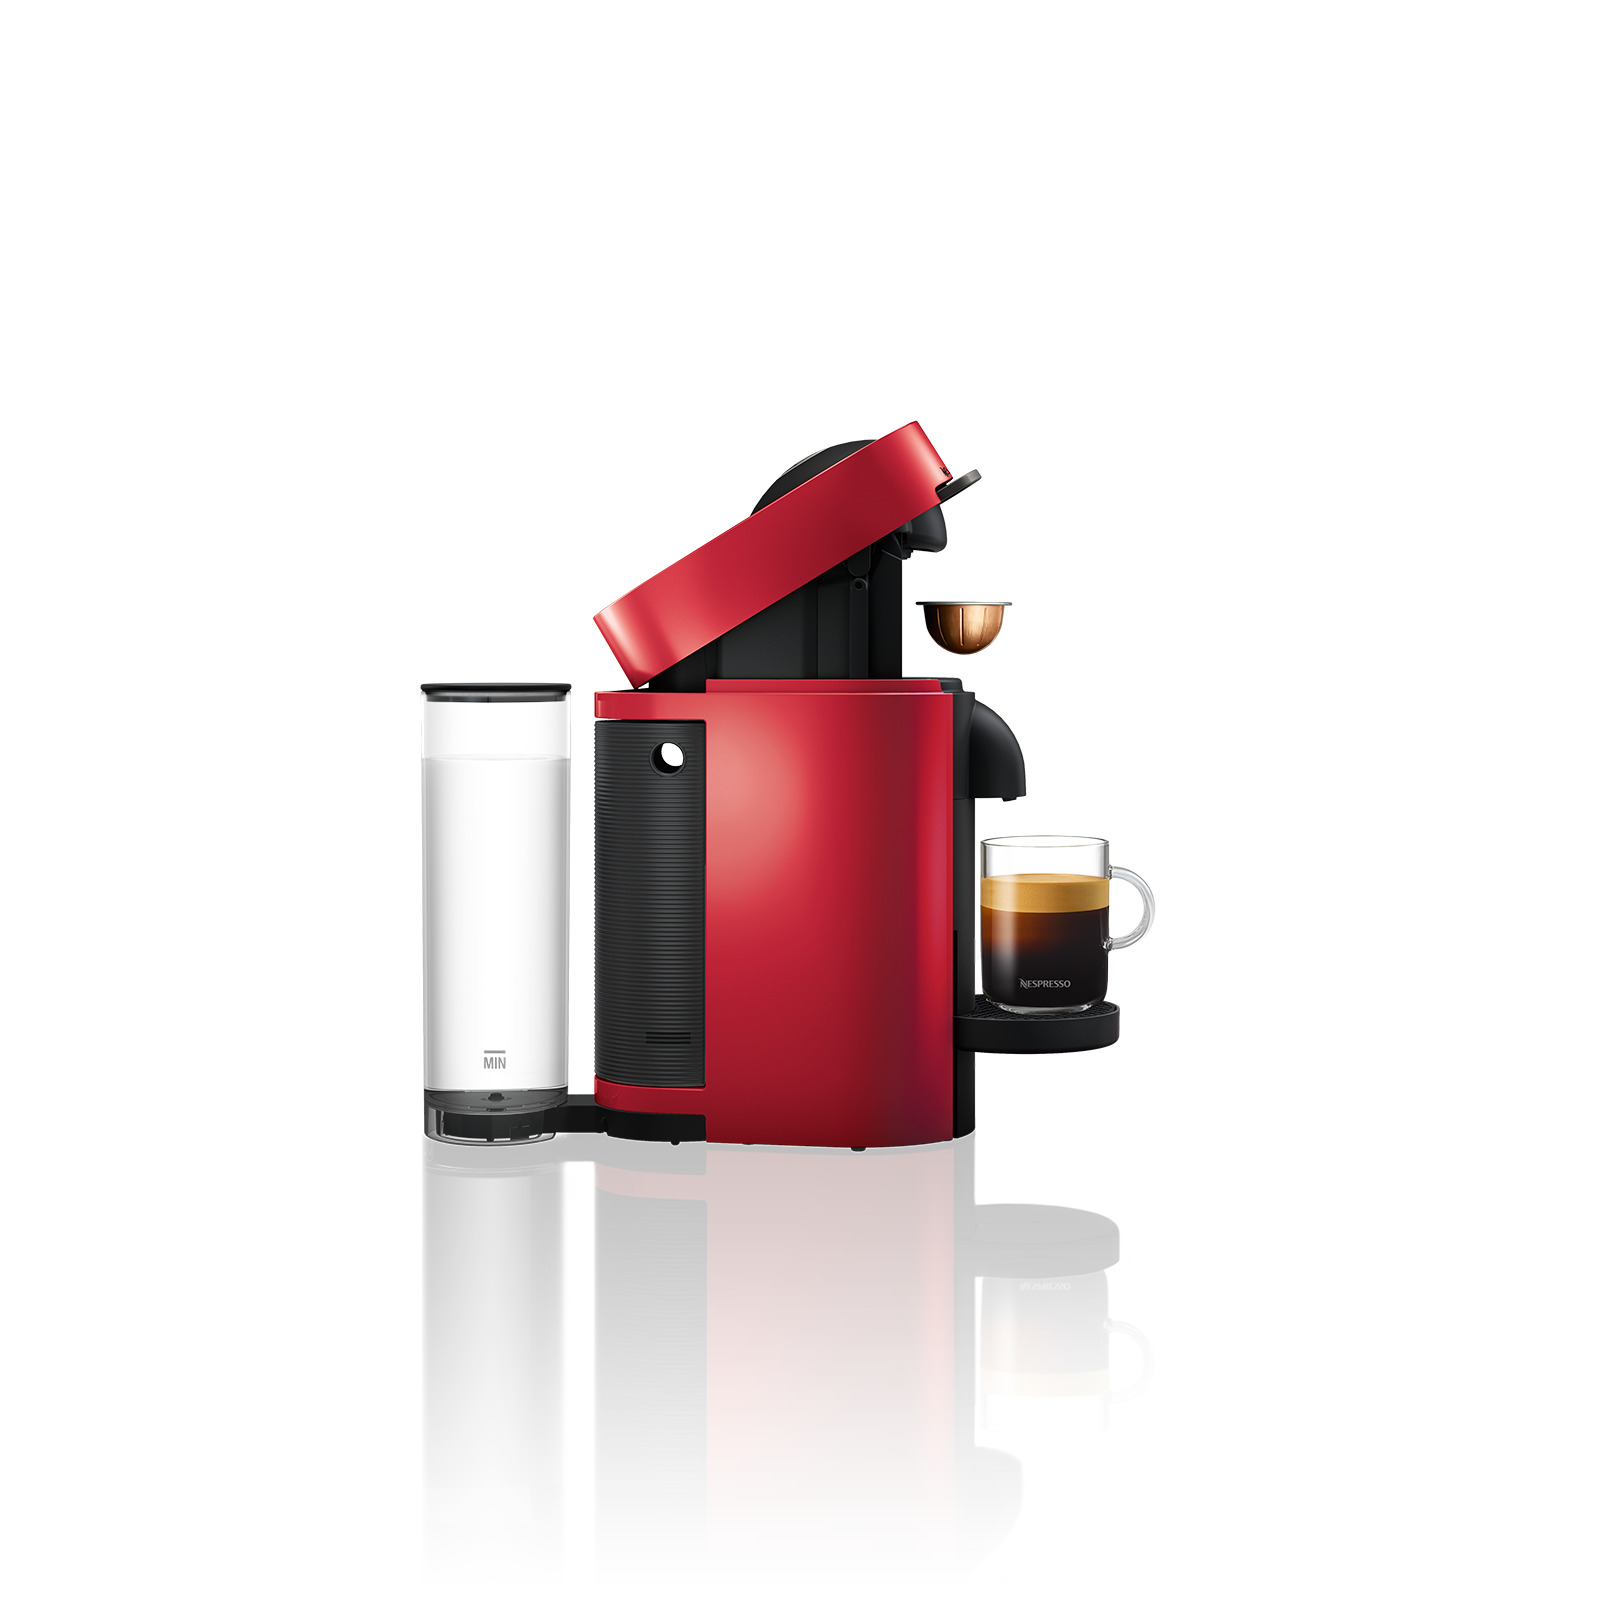 Nespresso's New Vertuo Coffee Machine Lets You Make Huge Cups Of Coffee,  But There's A Catch - TODAY